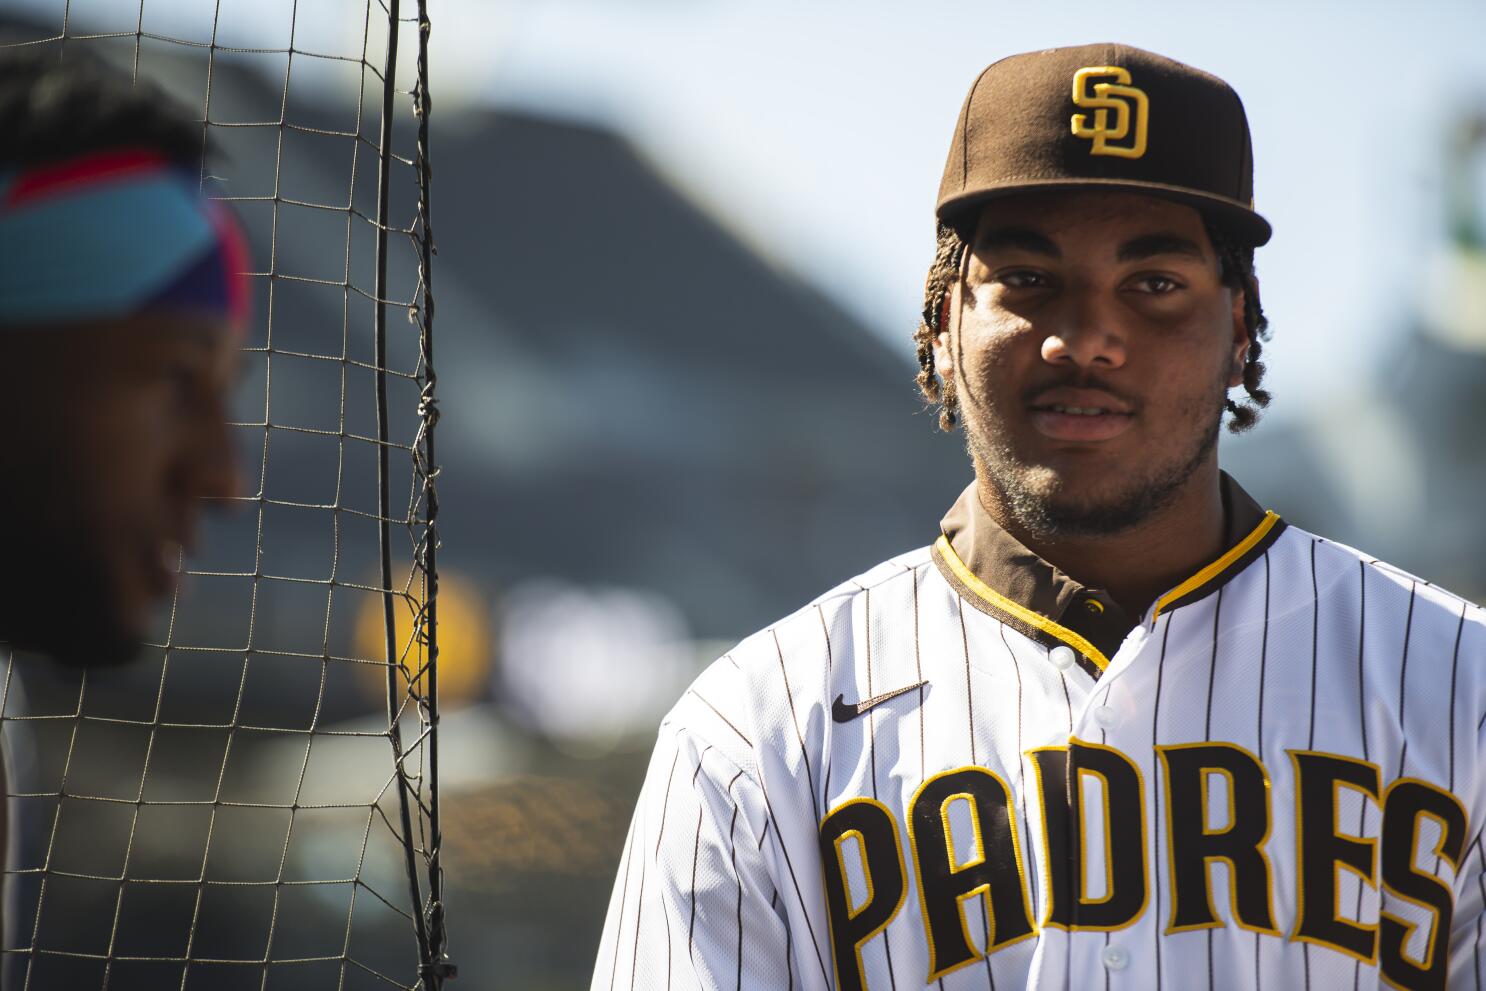 San Diego Padres Top 20 prospects for 2018 (updated) - Minor League Ball